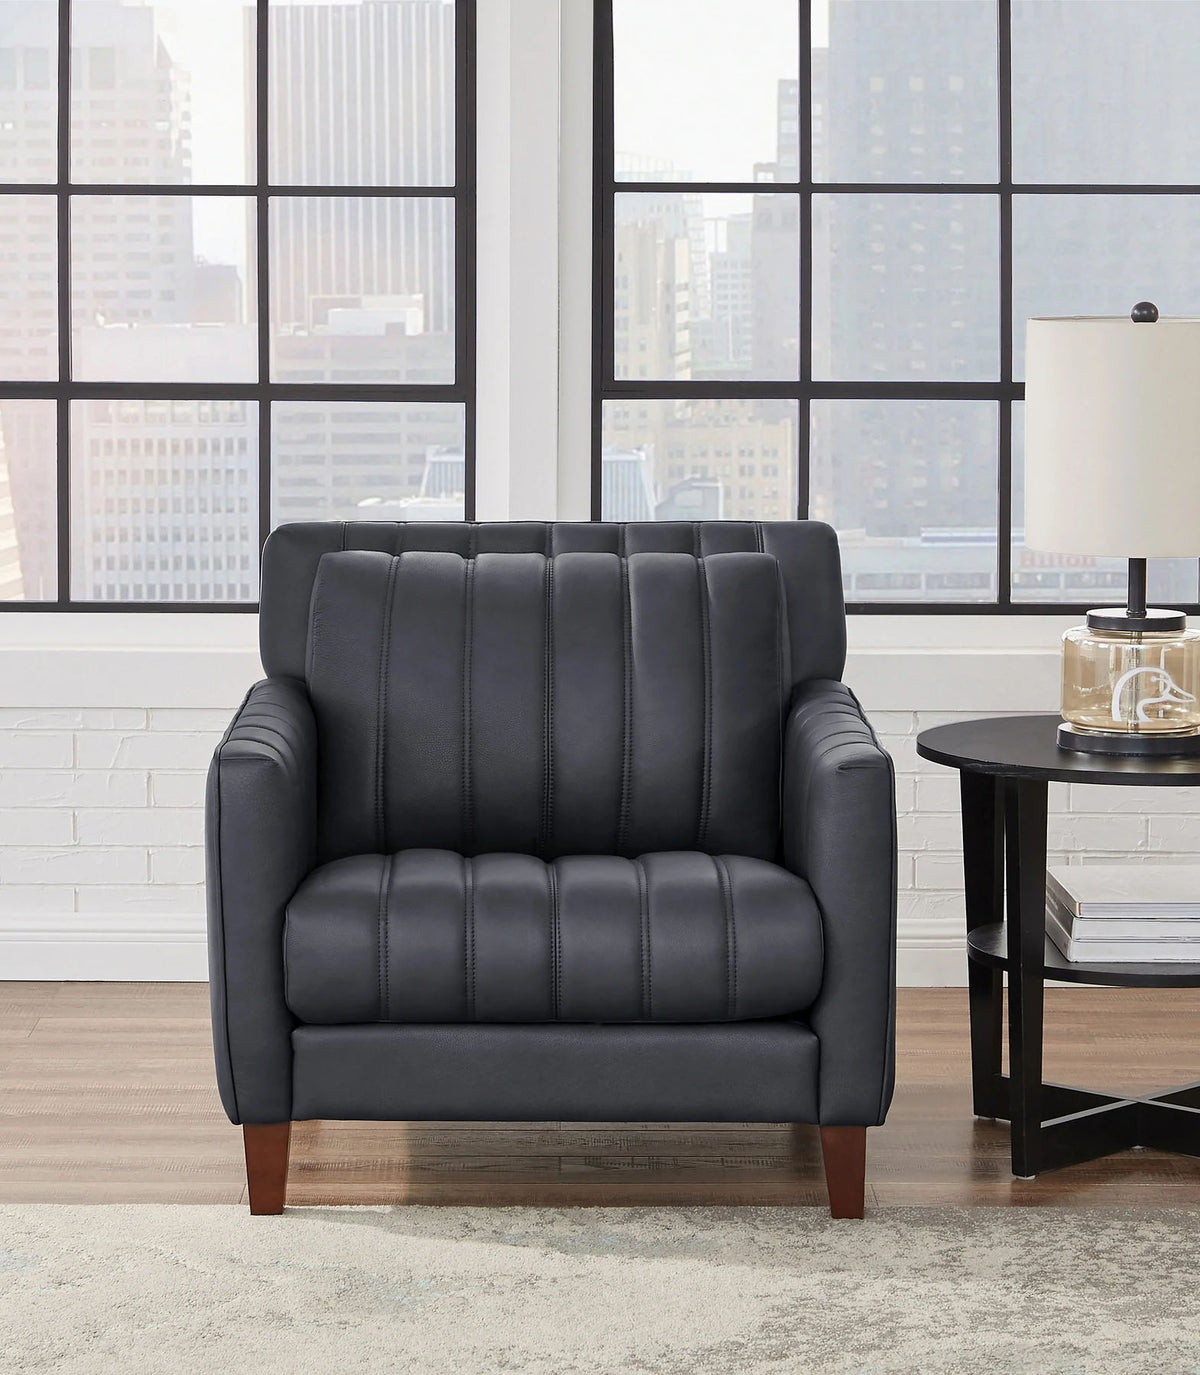 Channel Gray Leather Chair - MJM Furniture